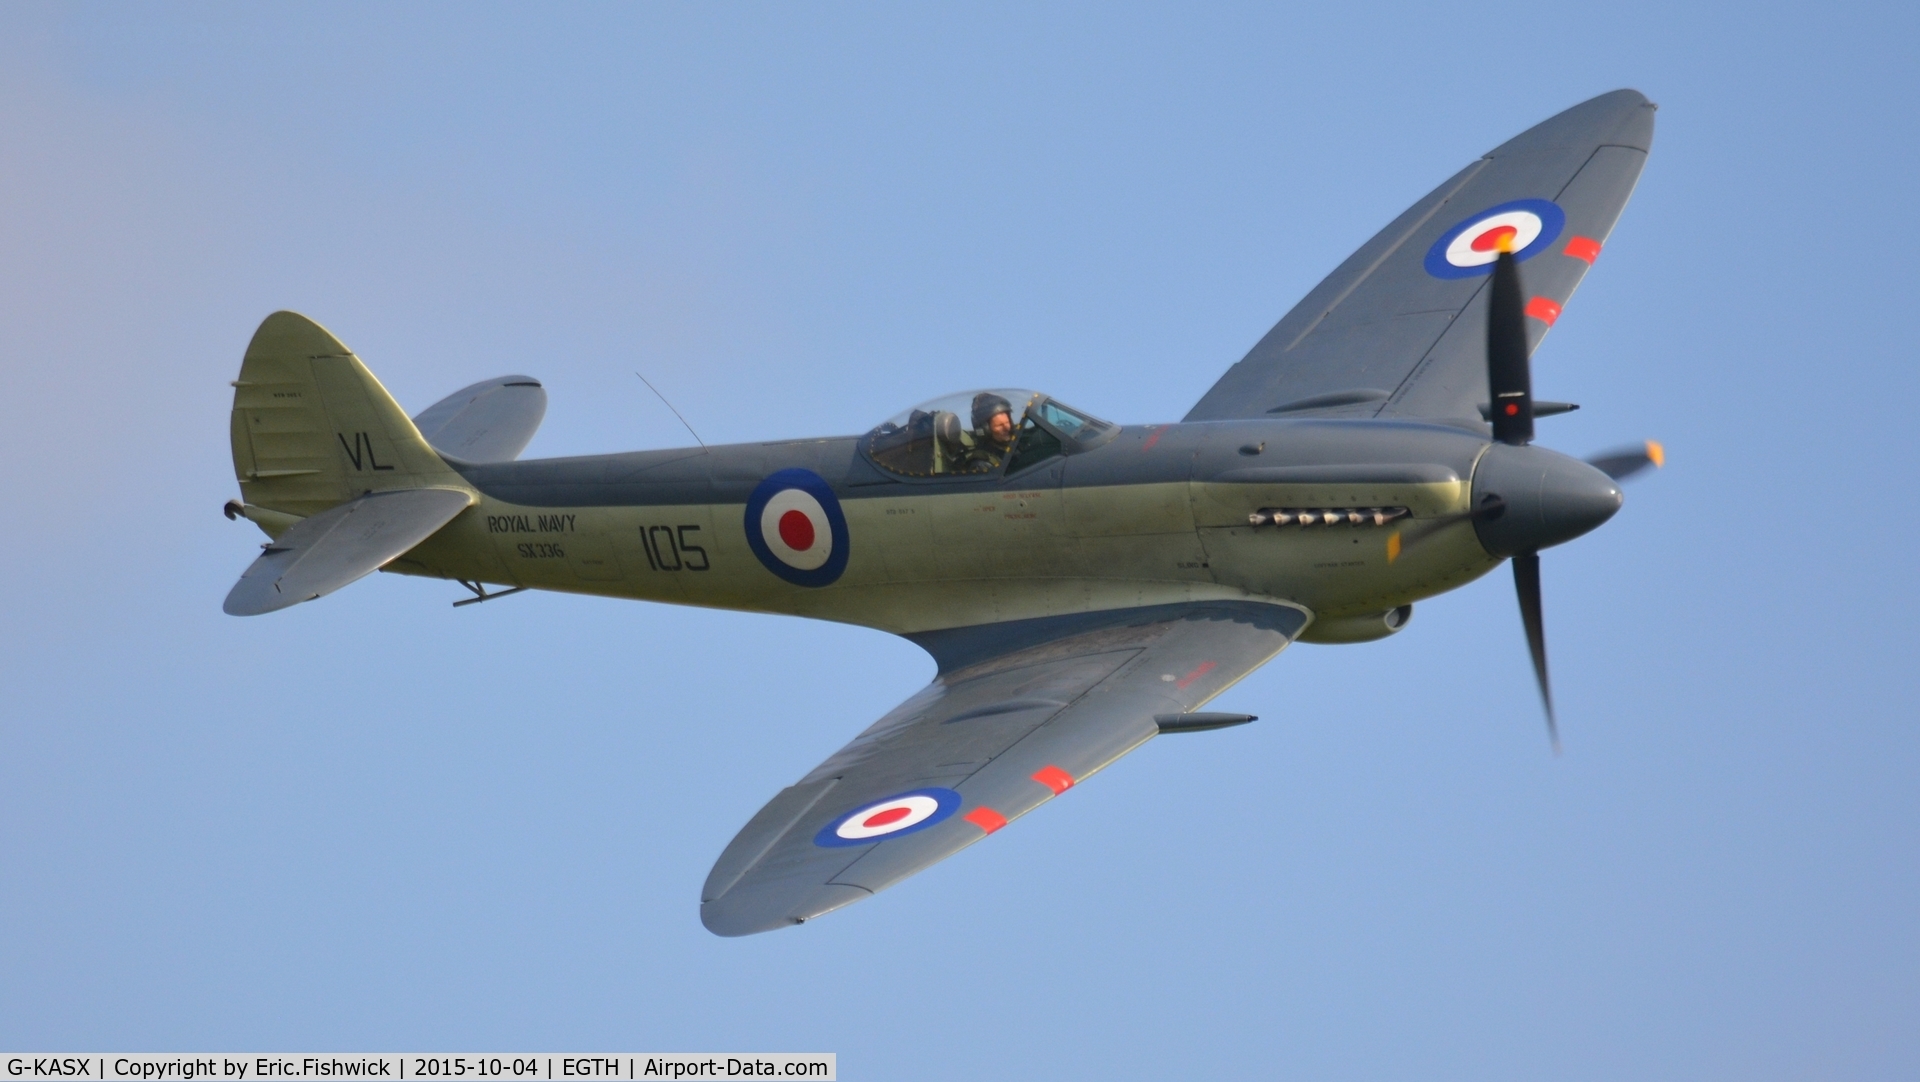 G-KASX, 1946 Supermarine 395 Seafire F.XVII C/N FLWA 25488, 42. G-KASX in display mode at The Shuttleworth 'Uncovered' Airshow (Finale,) Oct. 2015.